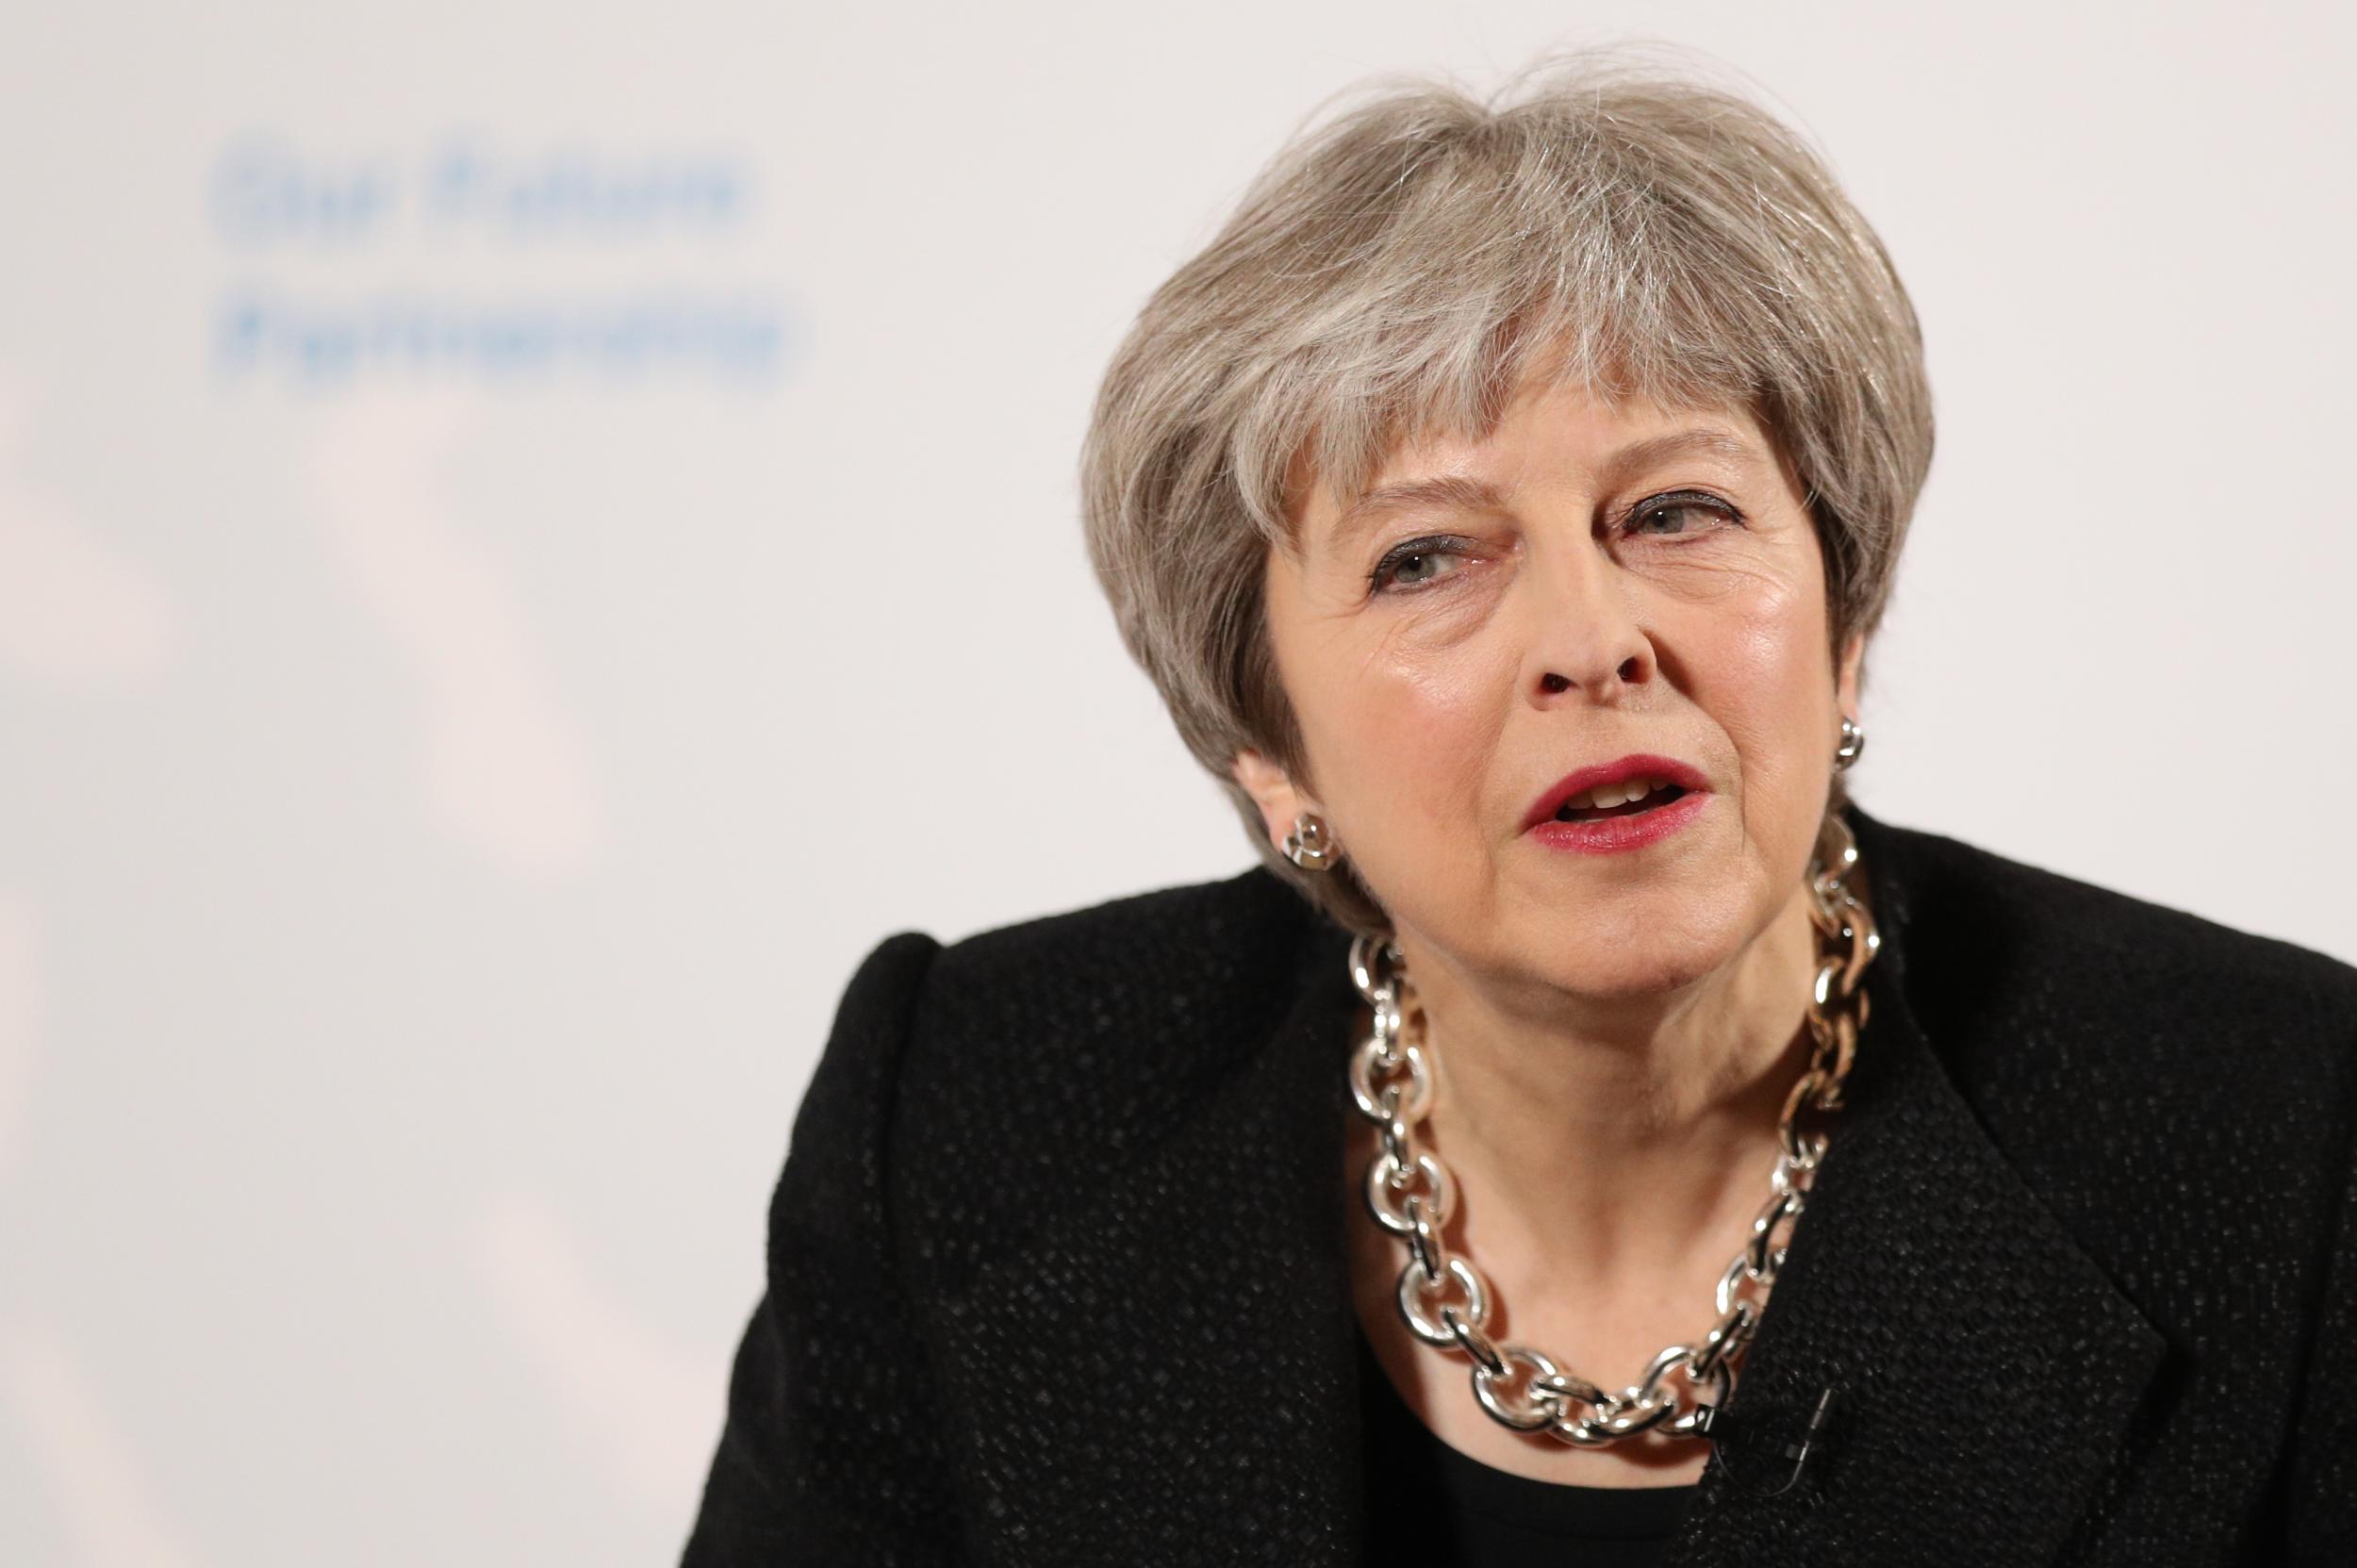 Theresa May's announcement comes after she challenged society to “explain or change” disparities in how people from different backgrounds are treated